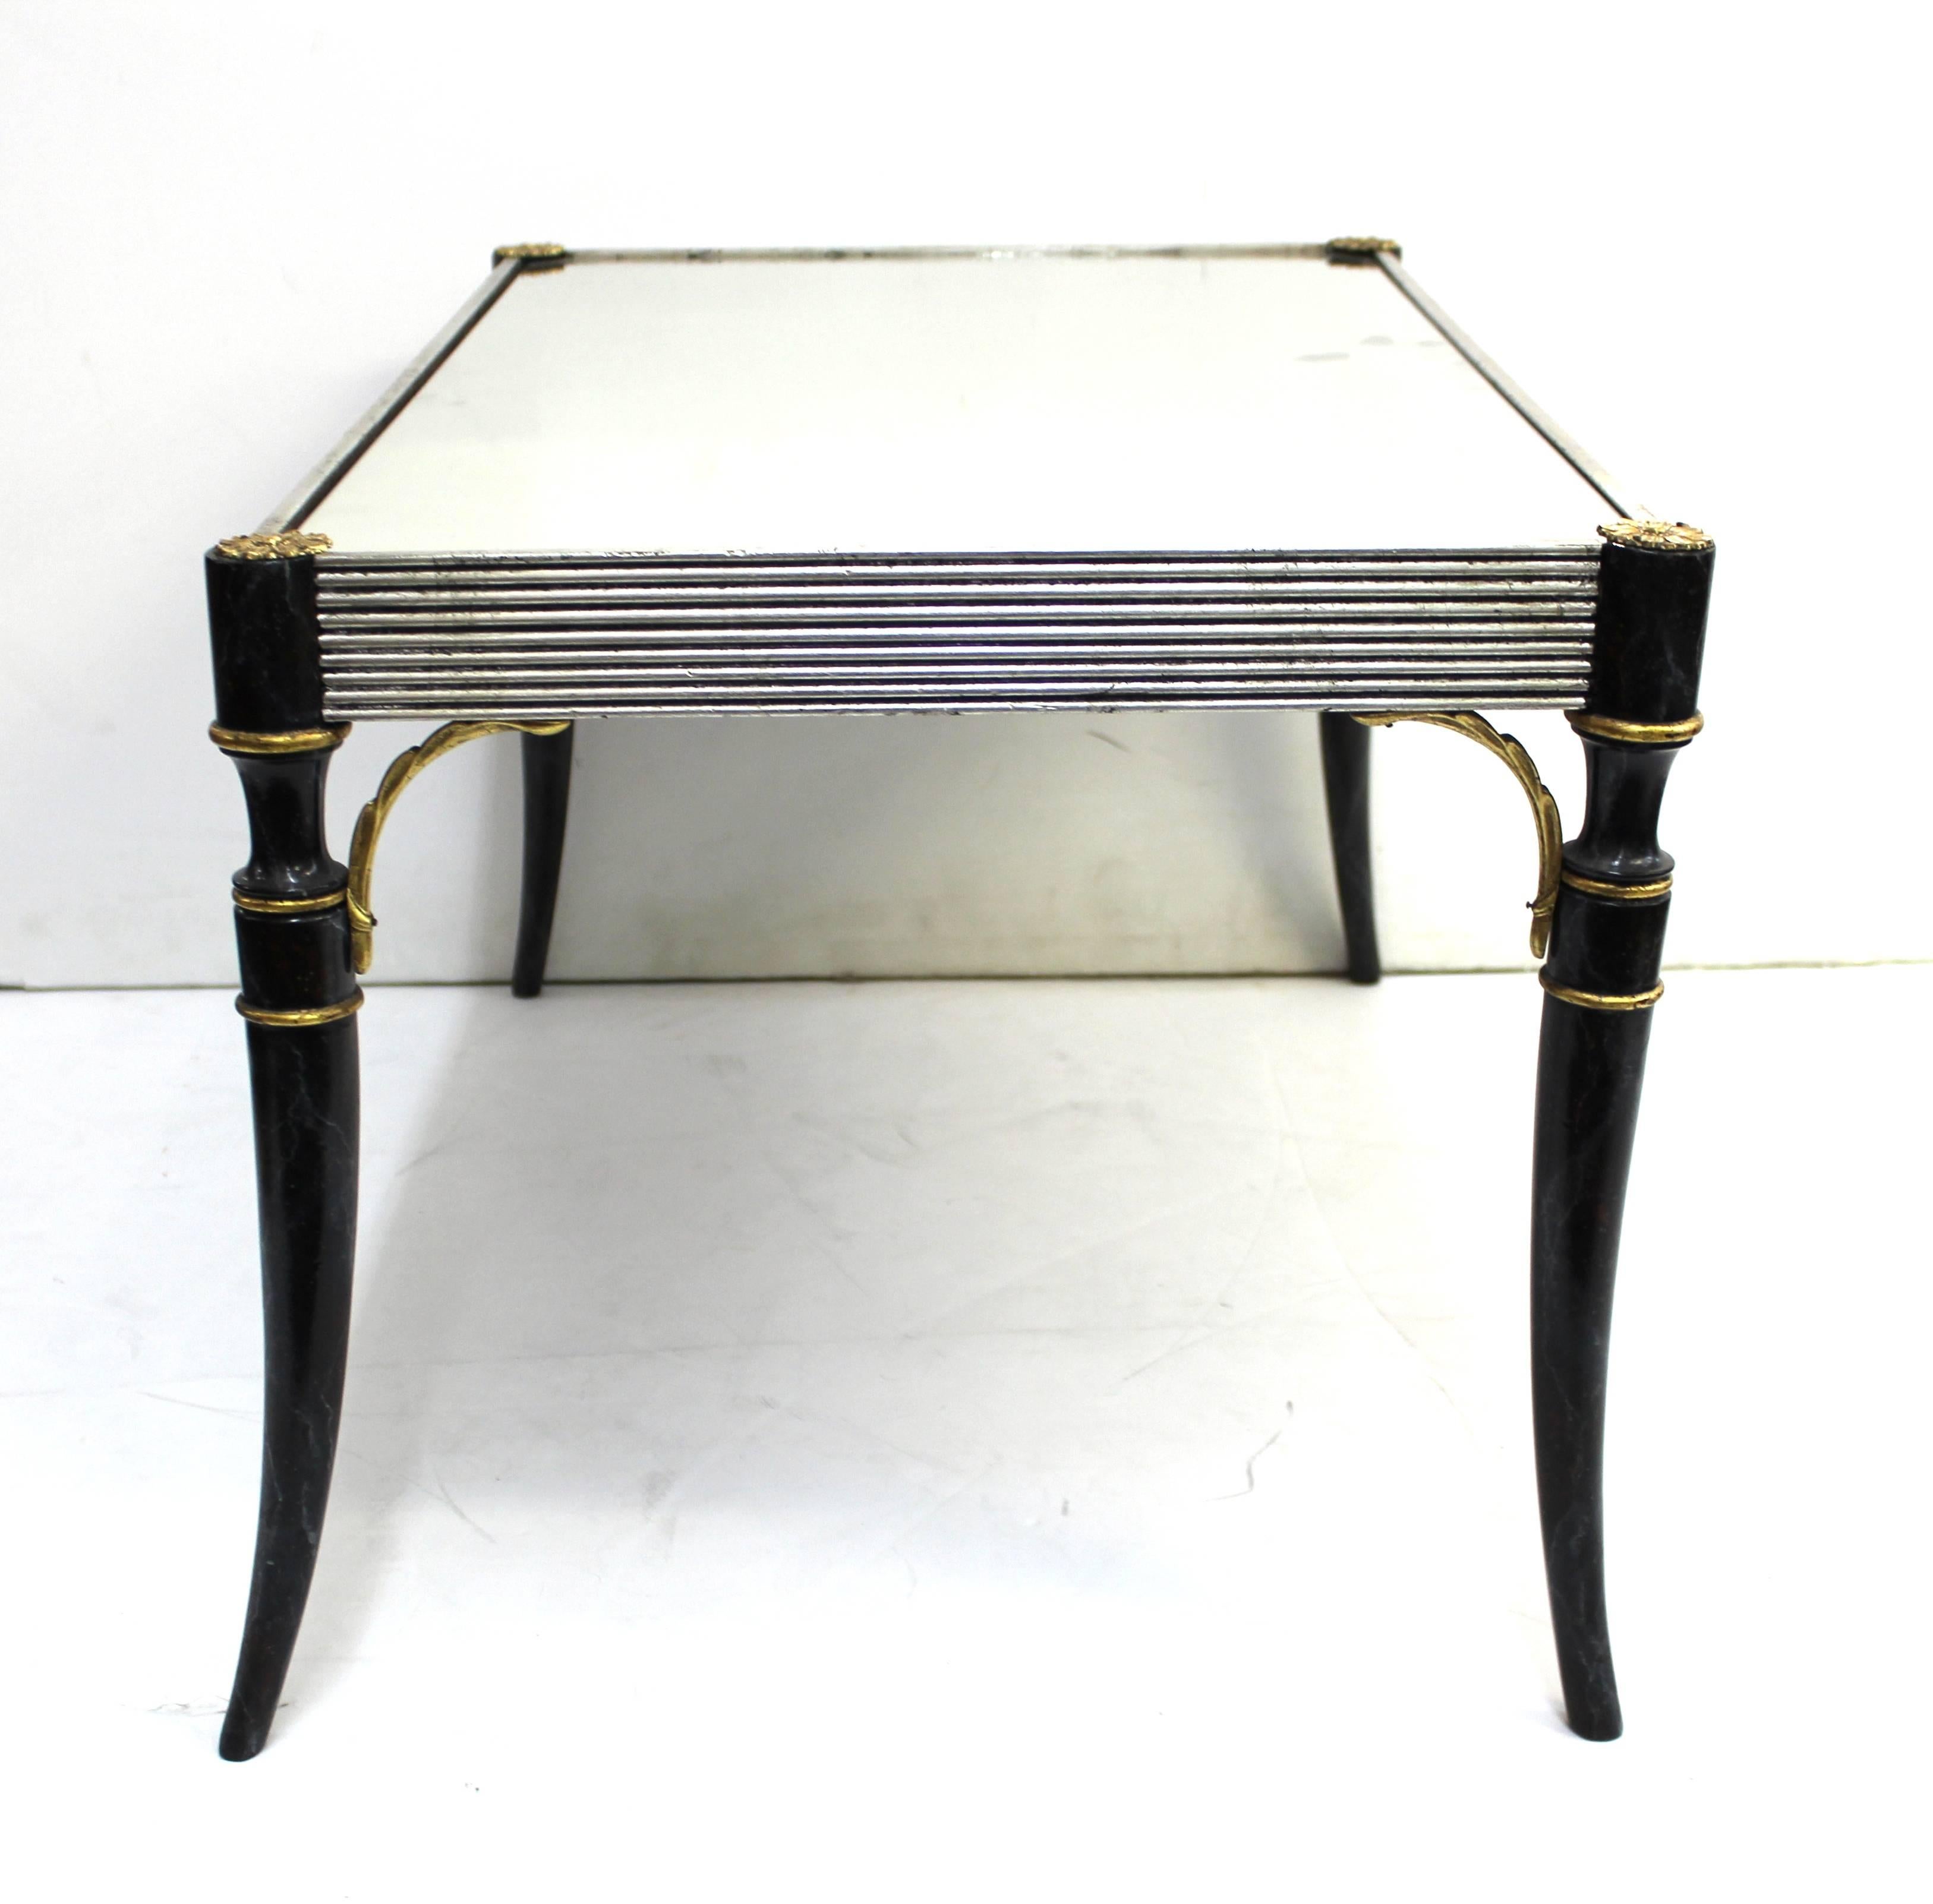 Hand-Painted Art Deco Cocktail Table in Painted and Silvered Wood with Mirror Top